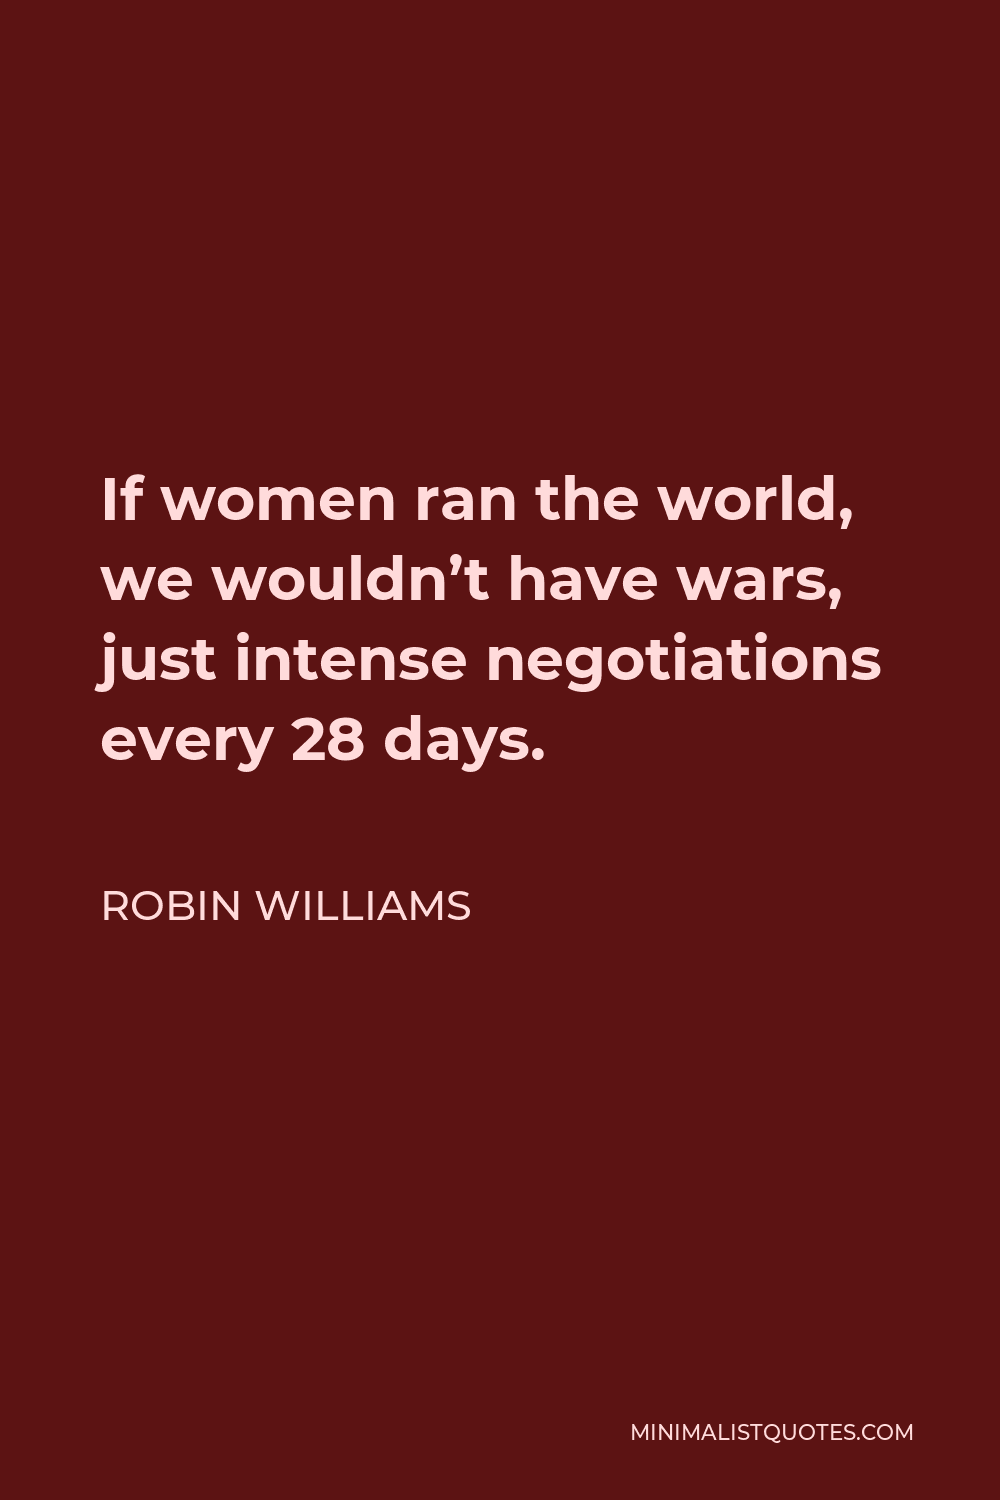 Robin Williams Quote - If women ran the world, we wouldn’t have wars, just intense negotiations every 28 days.